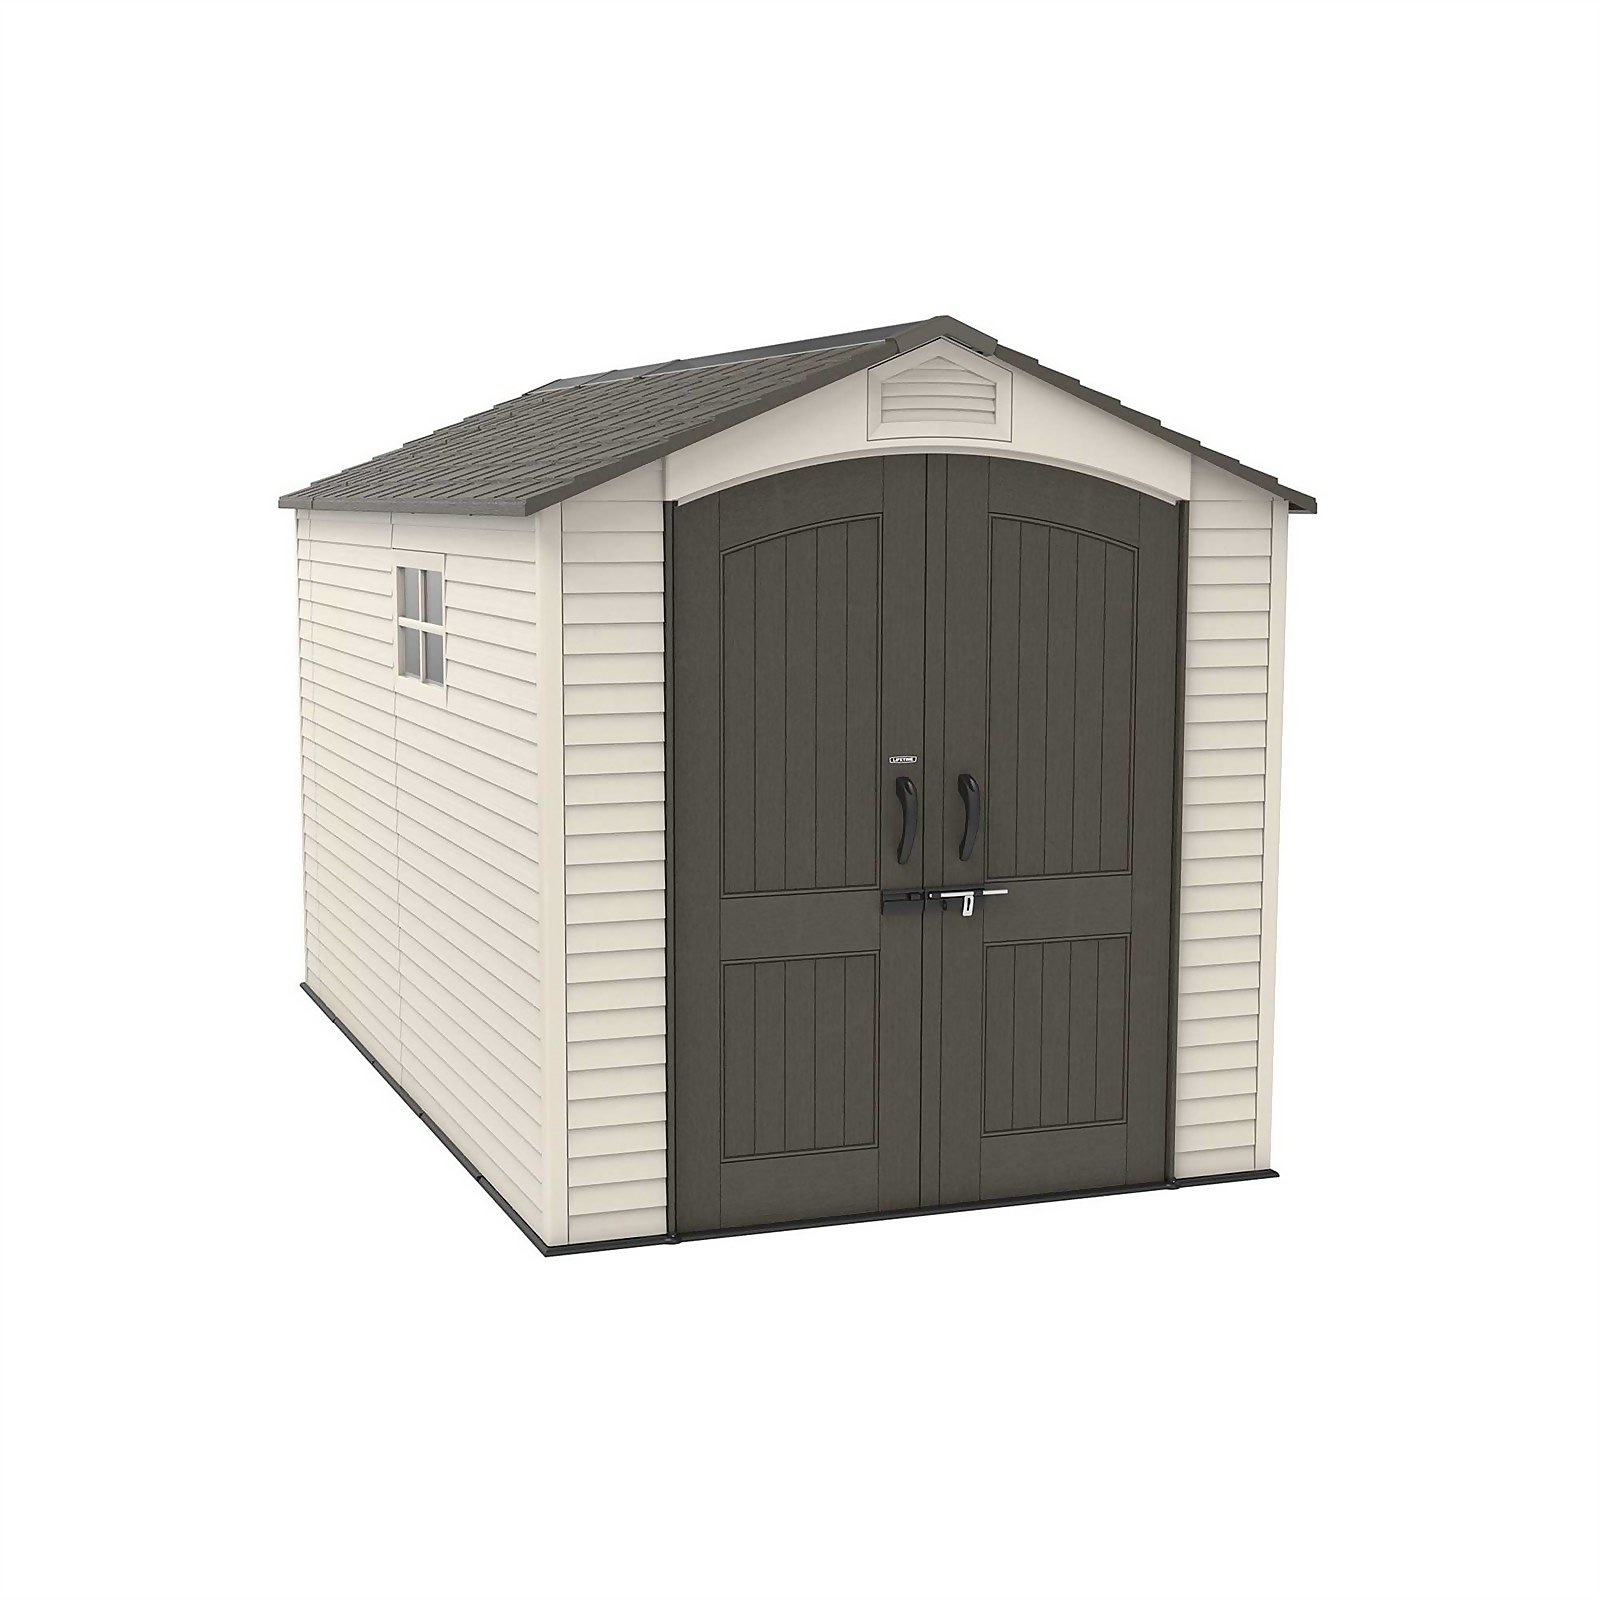 Lifetime 7 x 12ft Outdoor Storage Shed